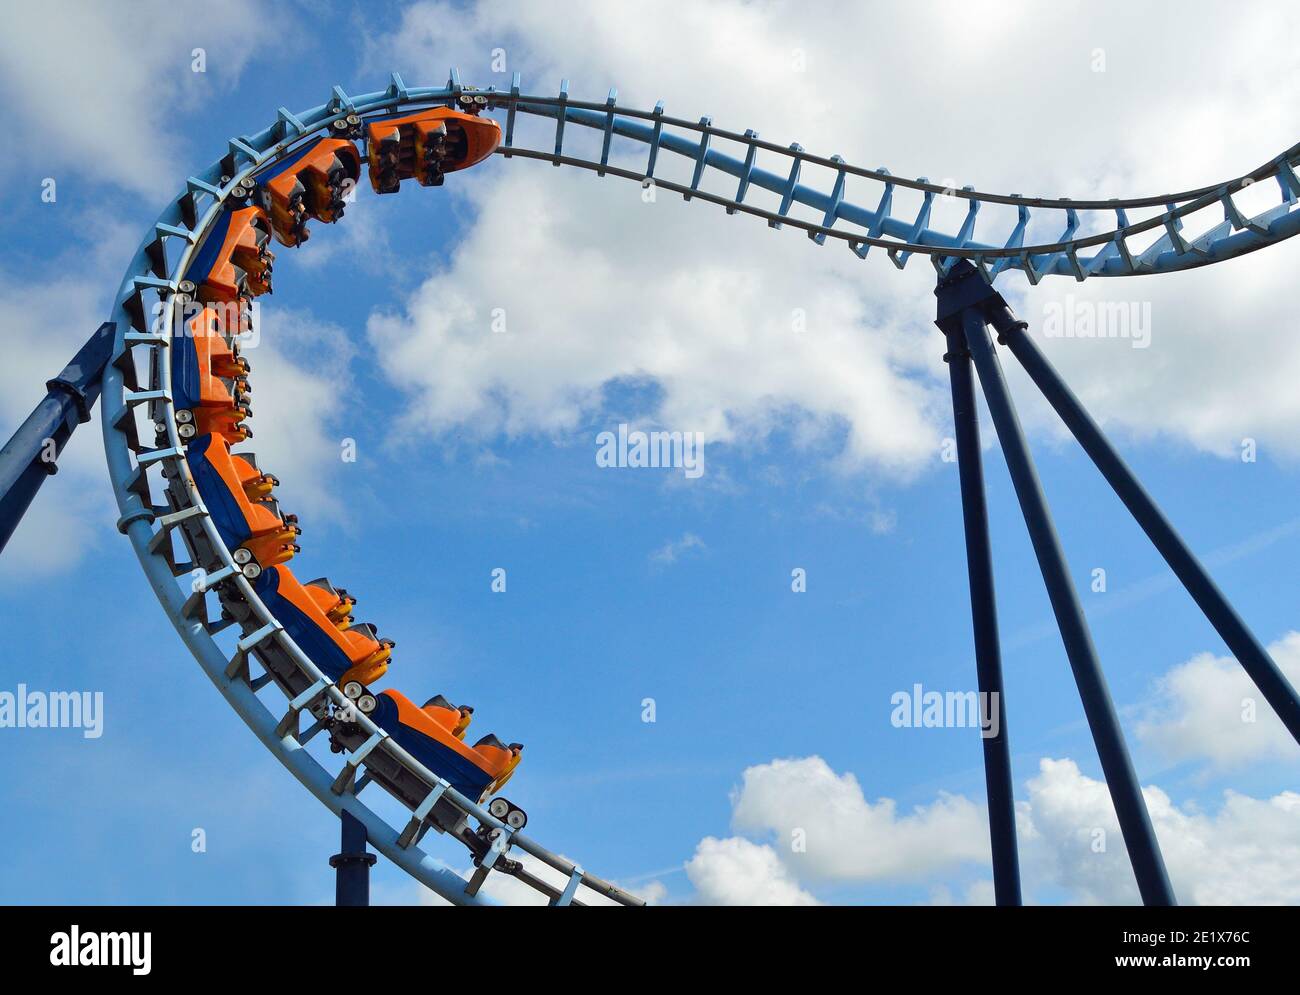 Roller coaster  ride filled  with thrill seekers Stock Photo